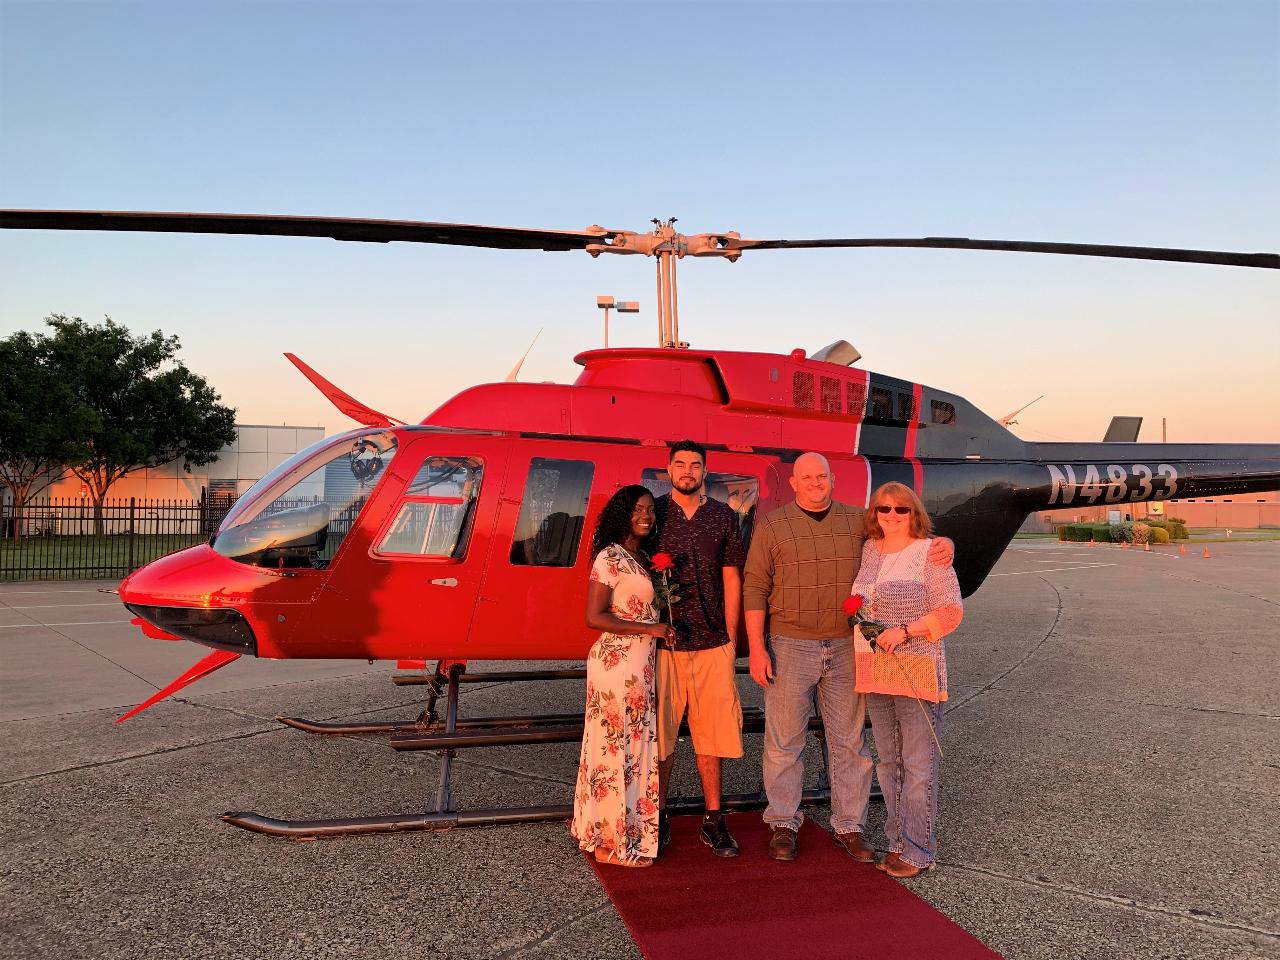 OLD  - VIP Dallas Skyline Tour - 2 seats -  SHARED FLIGHT -  Option to add a *3-course dinner. (approx 16 - 18 min) - NEW SALES PAUSED! As a safety precaution shared flights temporarily unavailable!